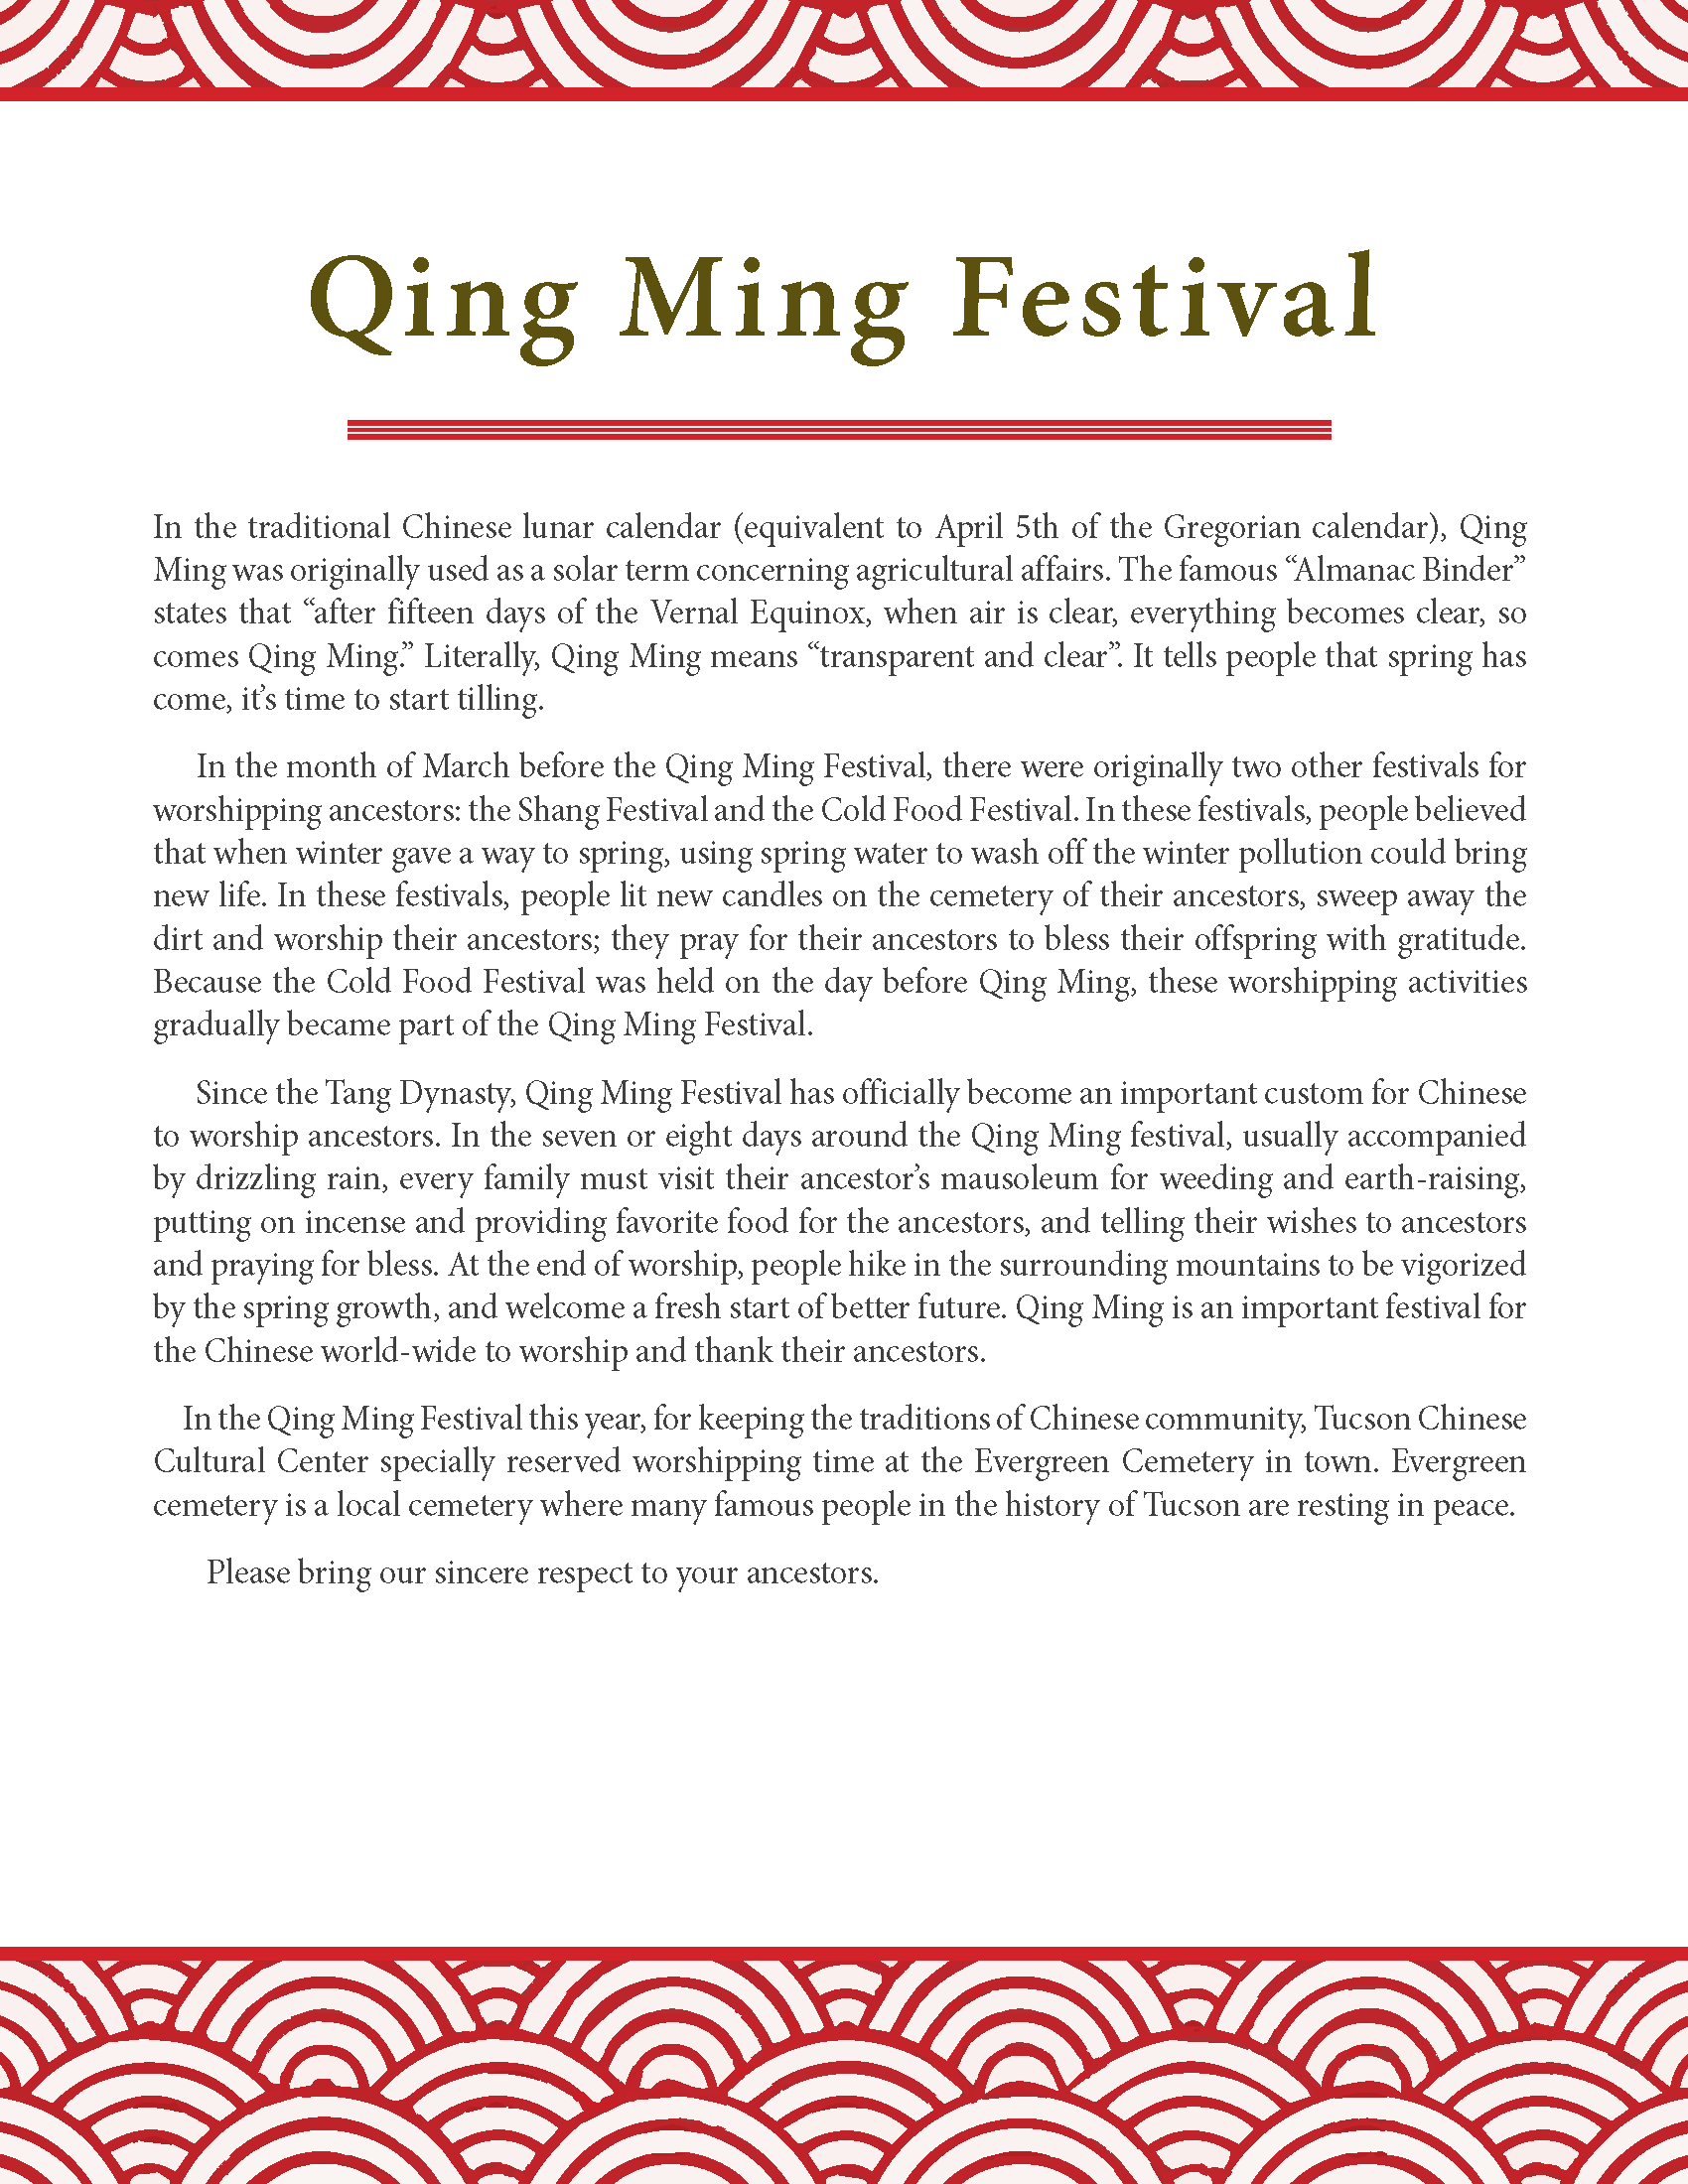 TCCC_ChingMing_Booklet_2022 - 3.28.22 0407_Page_04.png